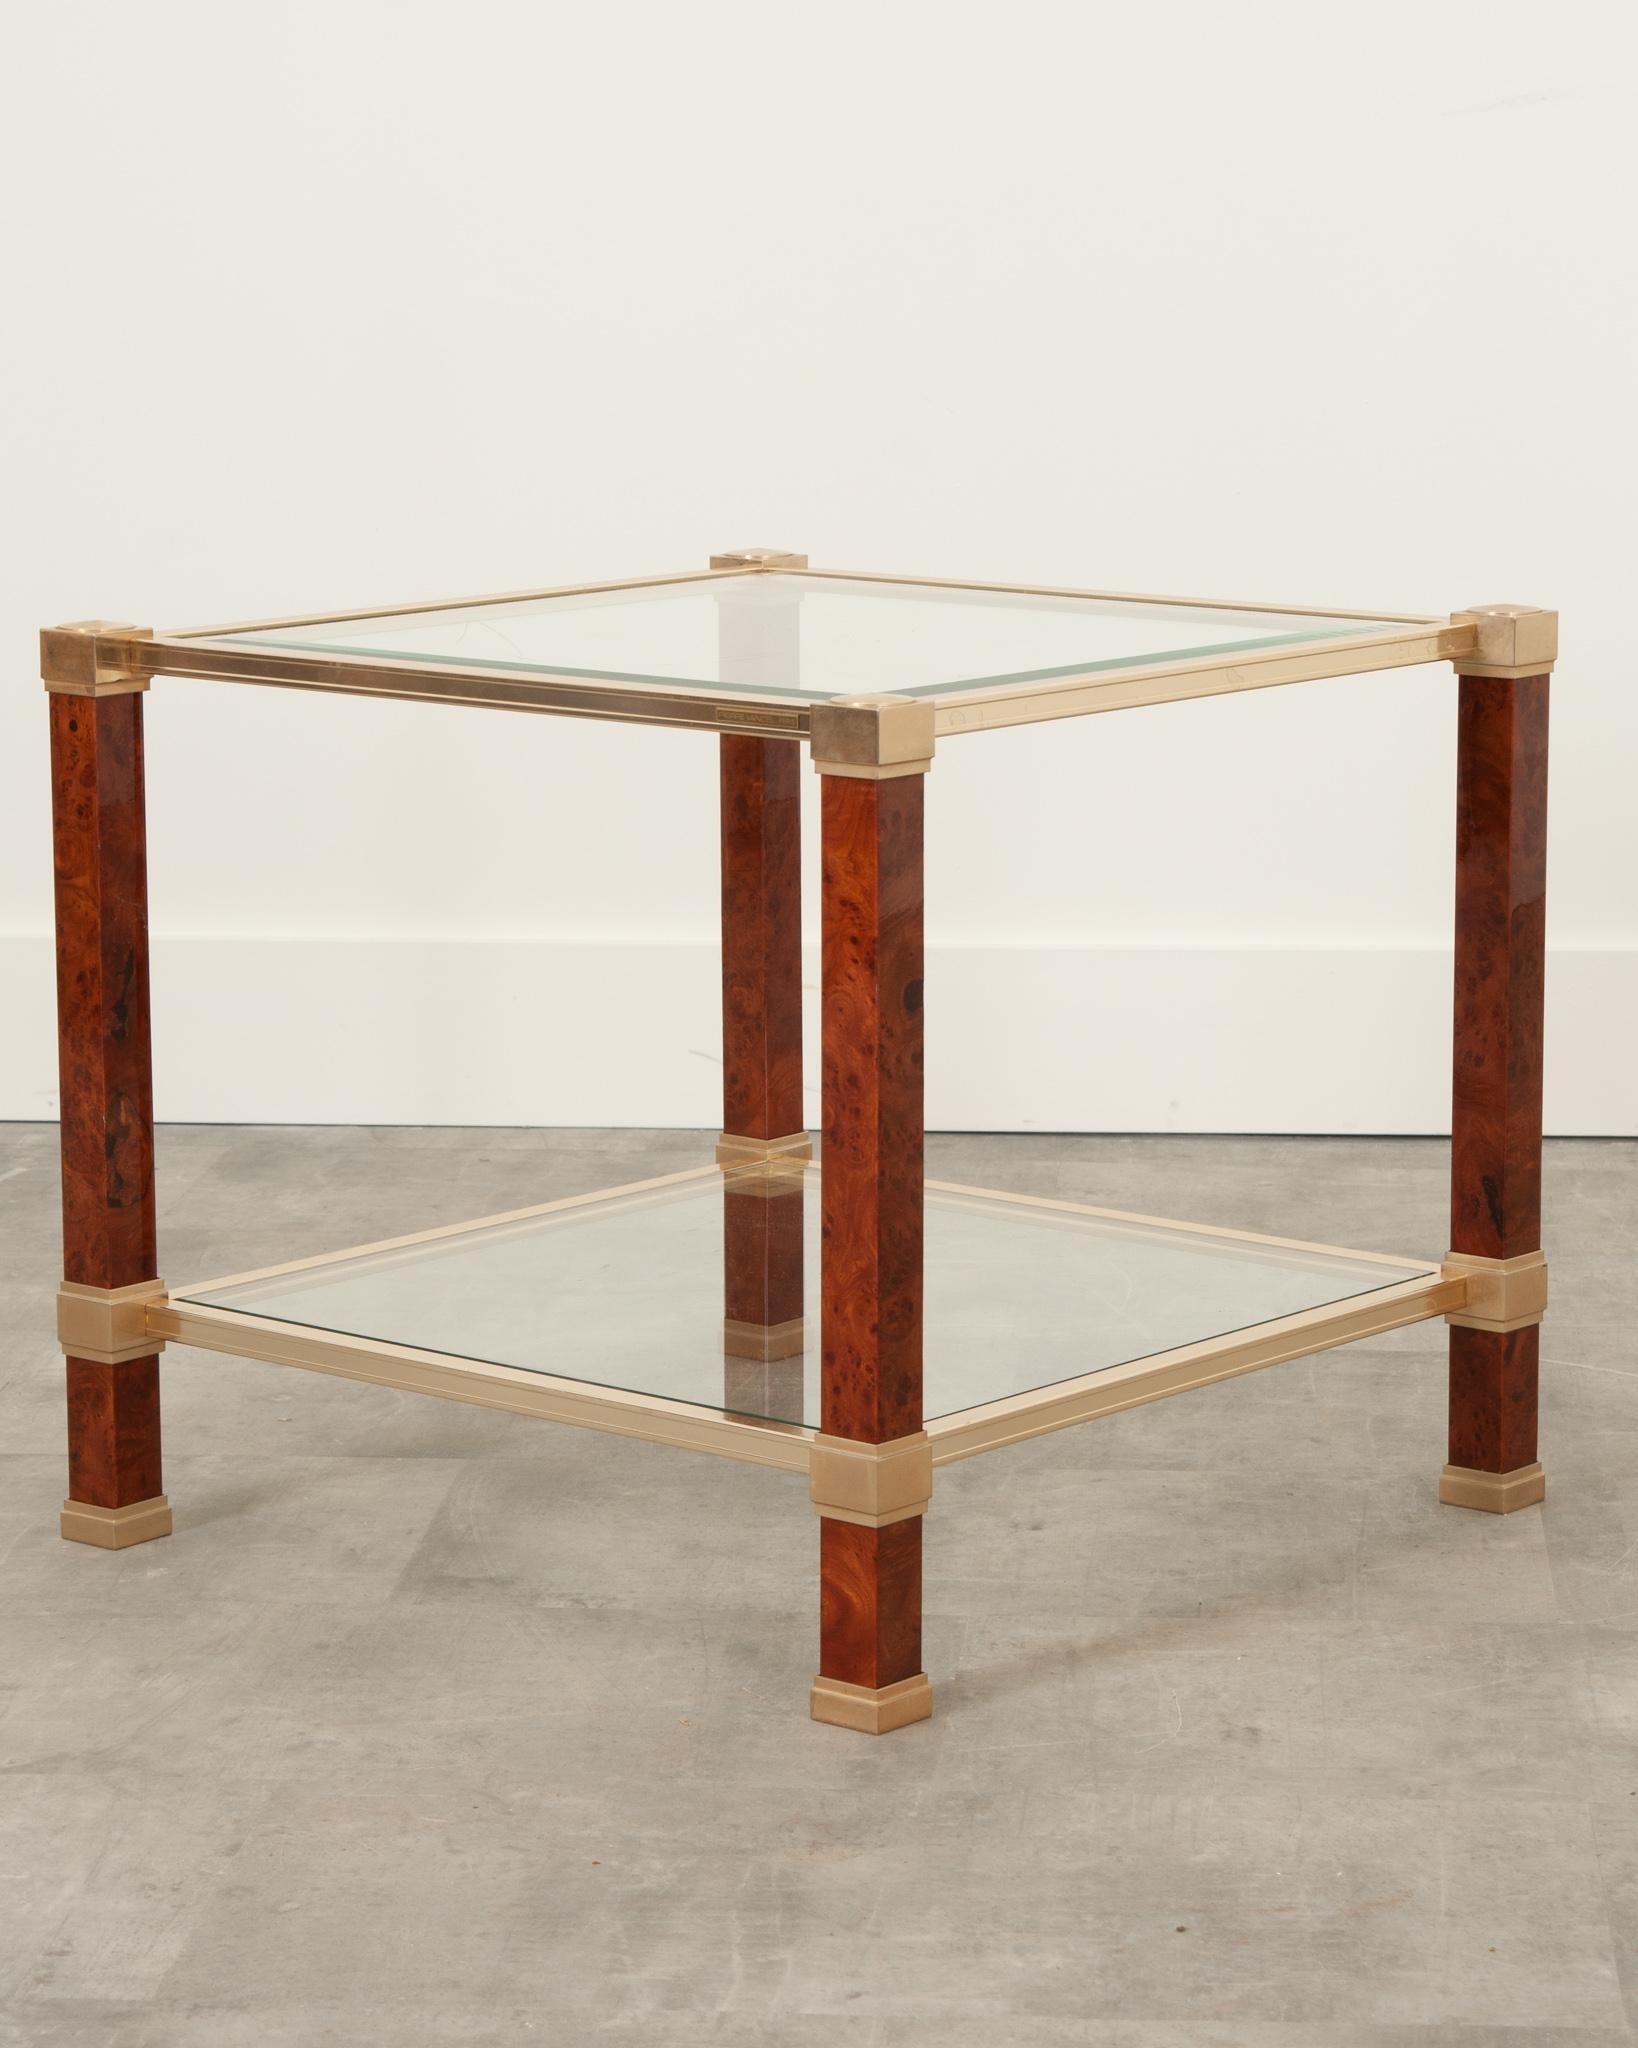 A square vintage French cocktail or coffee table with a unique flair. The frame is made of brass and supported by square acrylic legs. Snuggly enclosed in brass, the top glass is beveled with a small chip at one corner. The lower tier glass is in